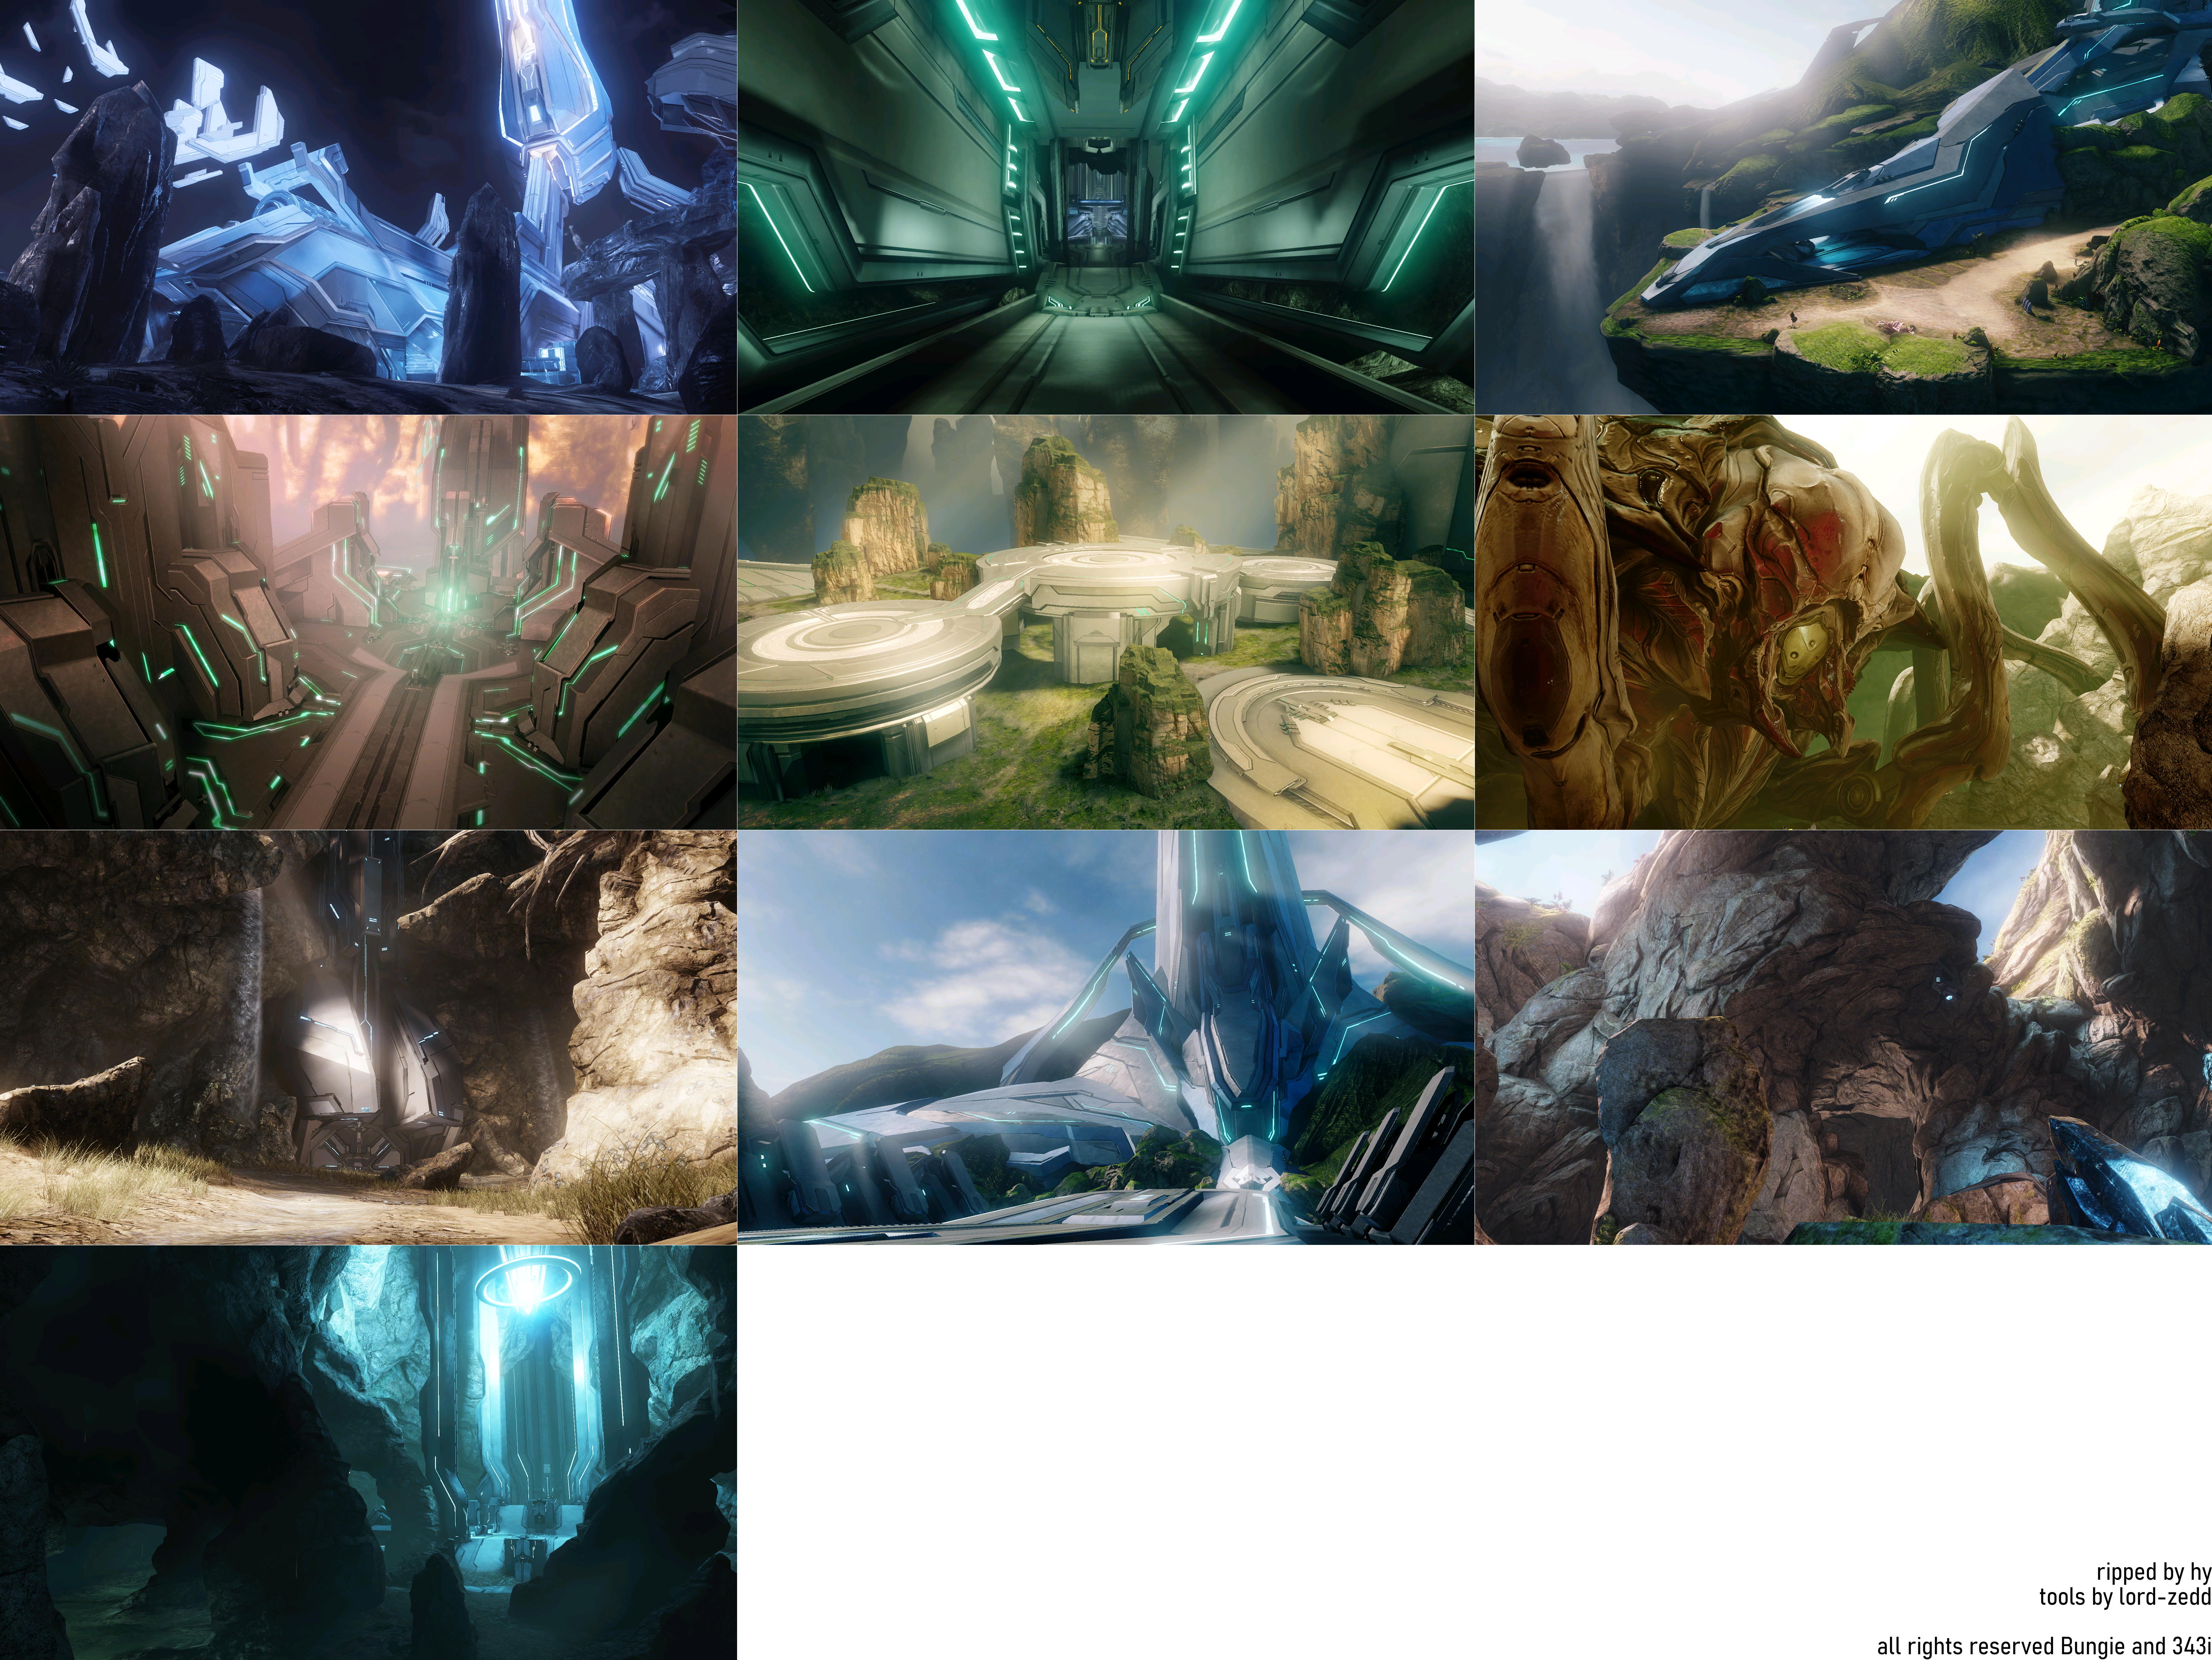 Halo 4 Spartan Ops Level Loading Screens